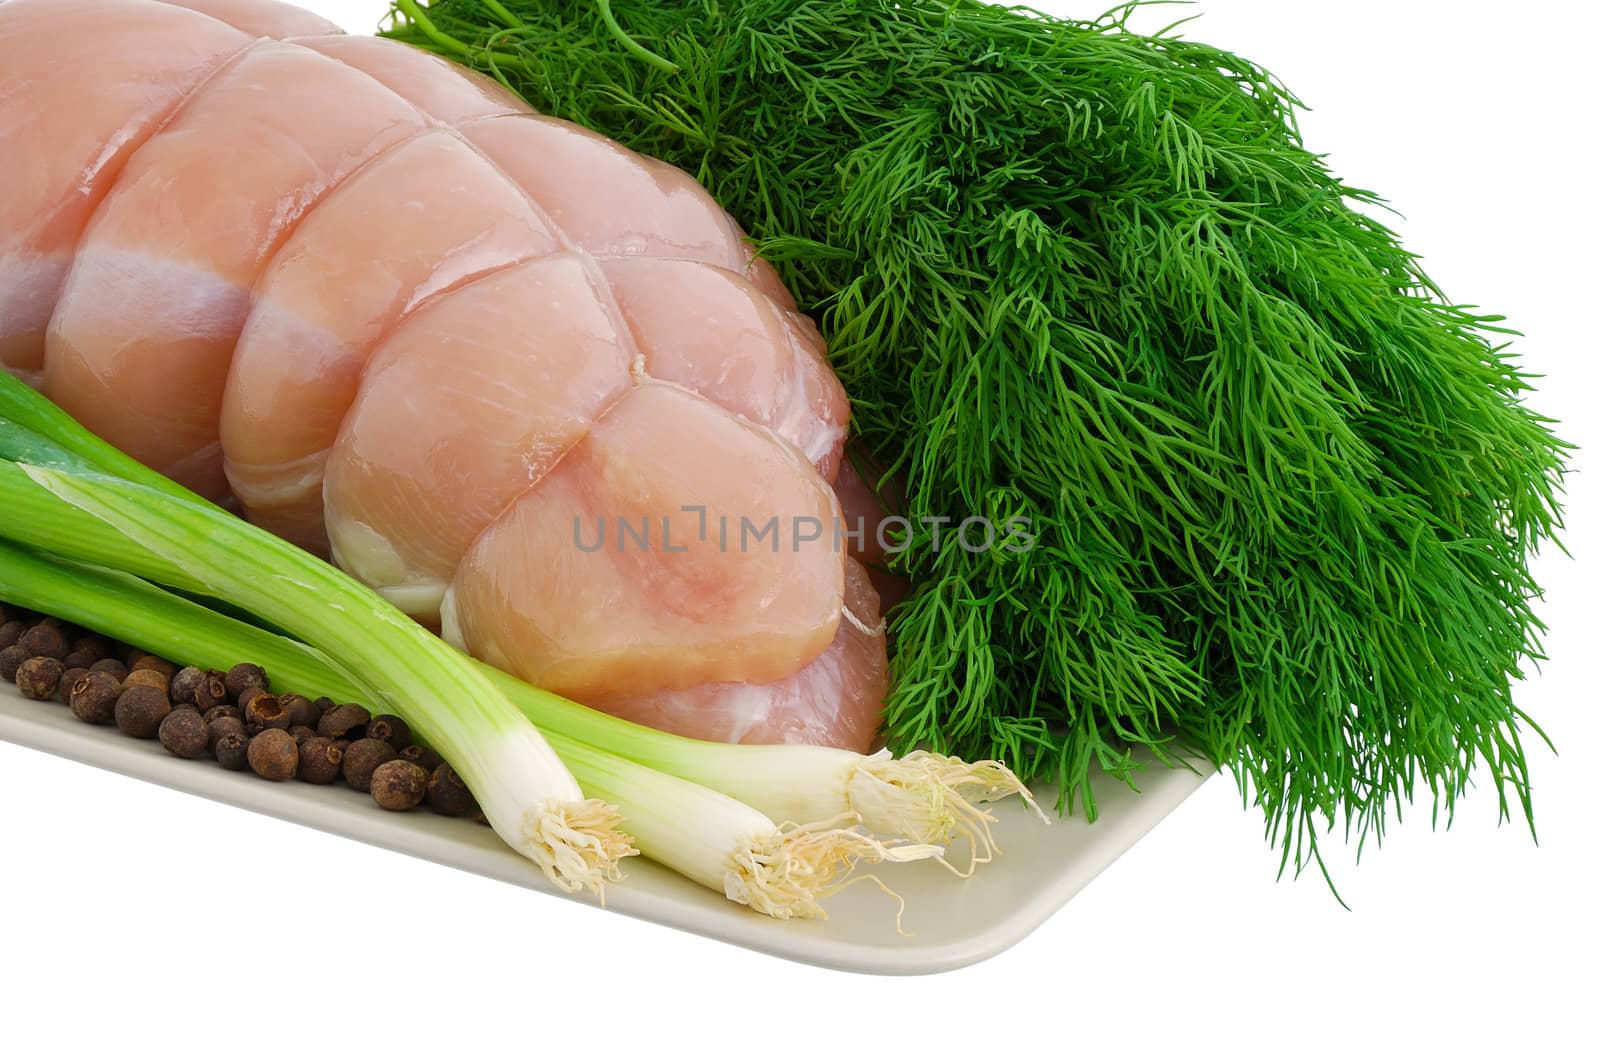 Bound turkey breast with green vegetables on plate isolated on white background